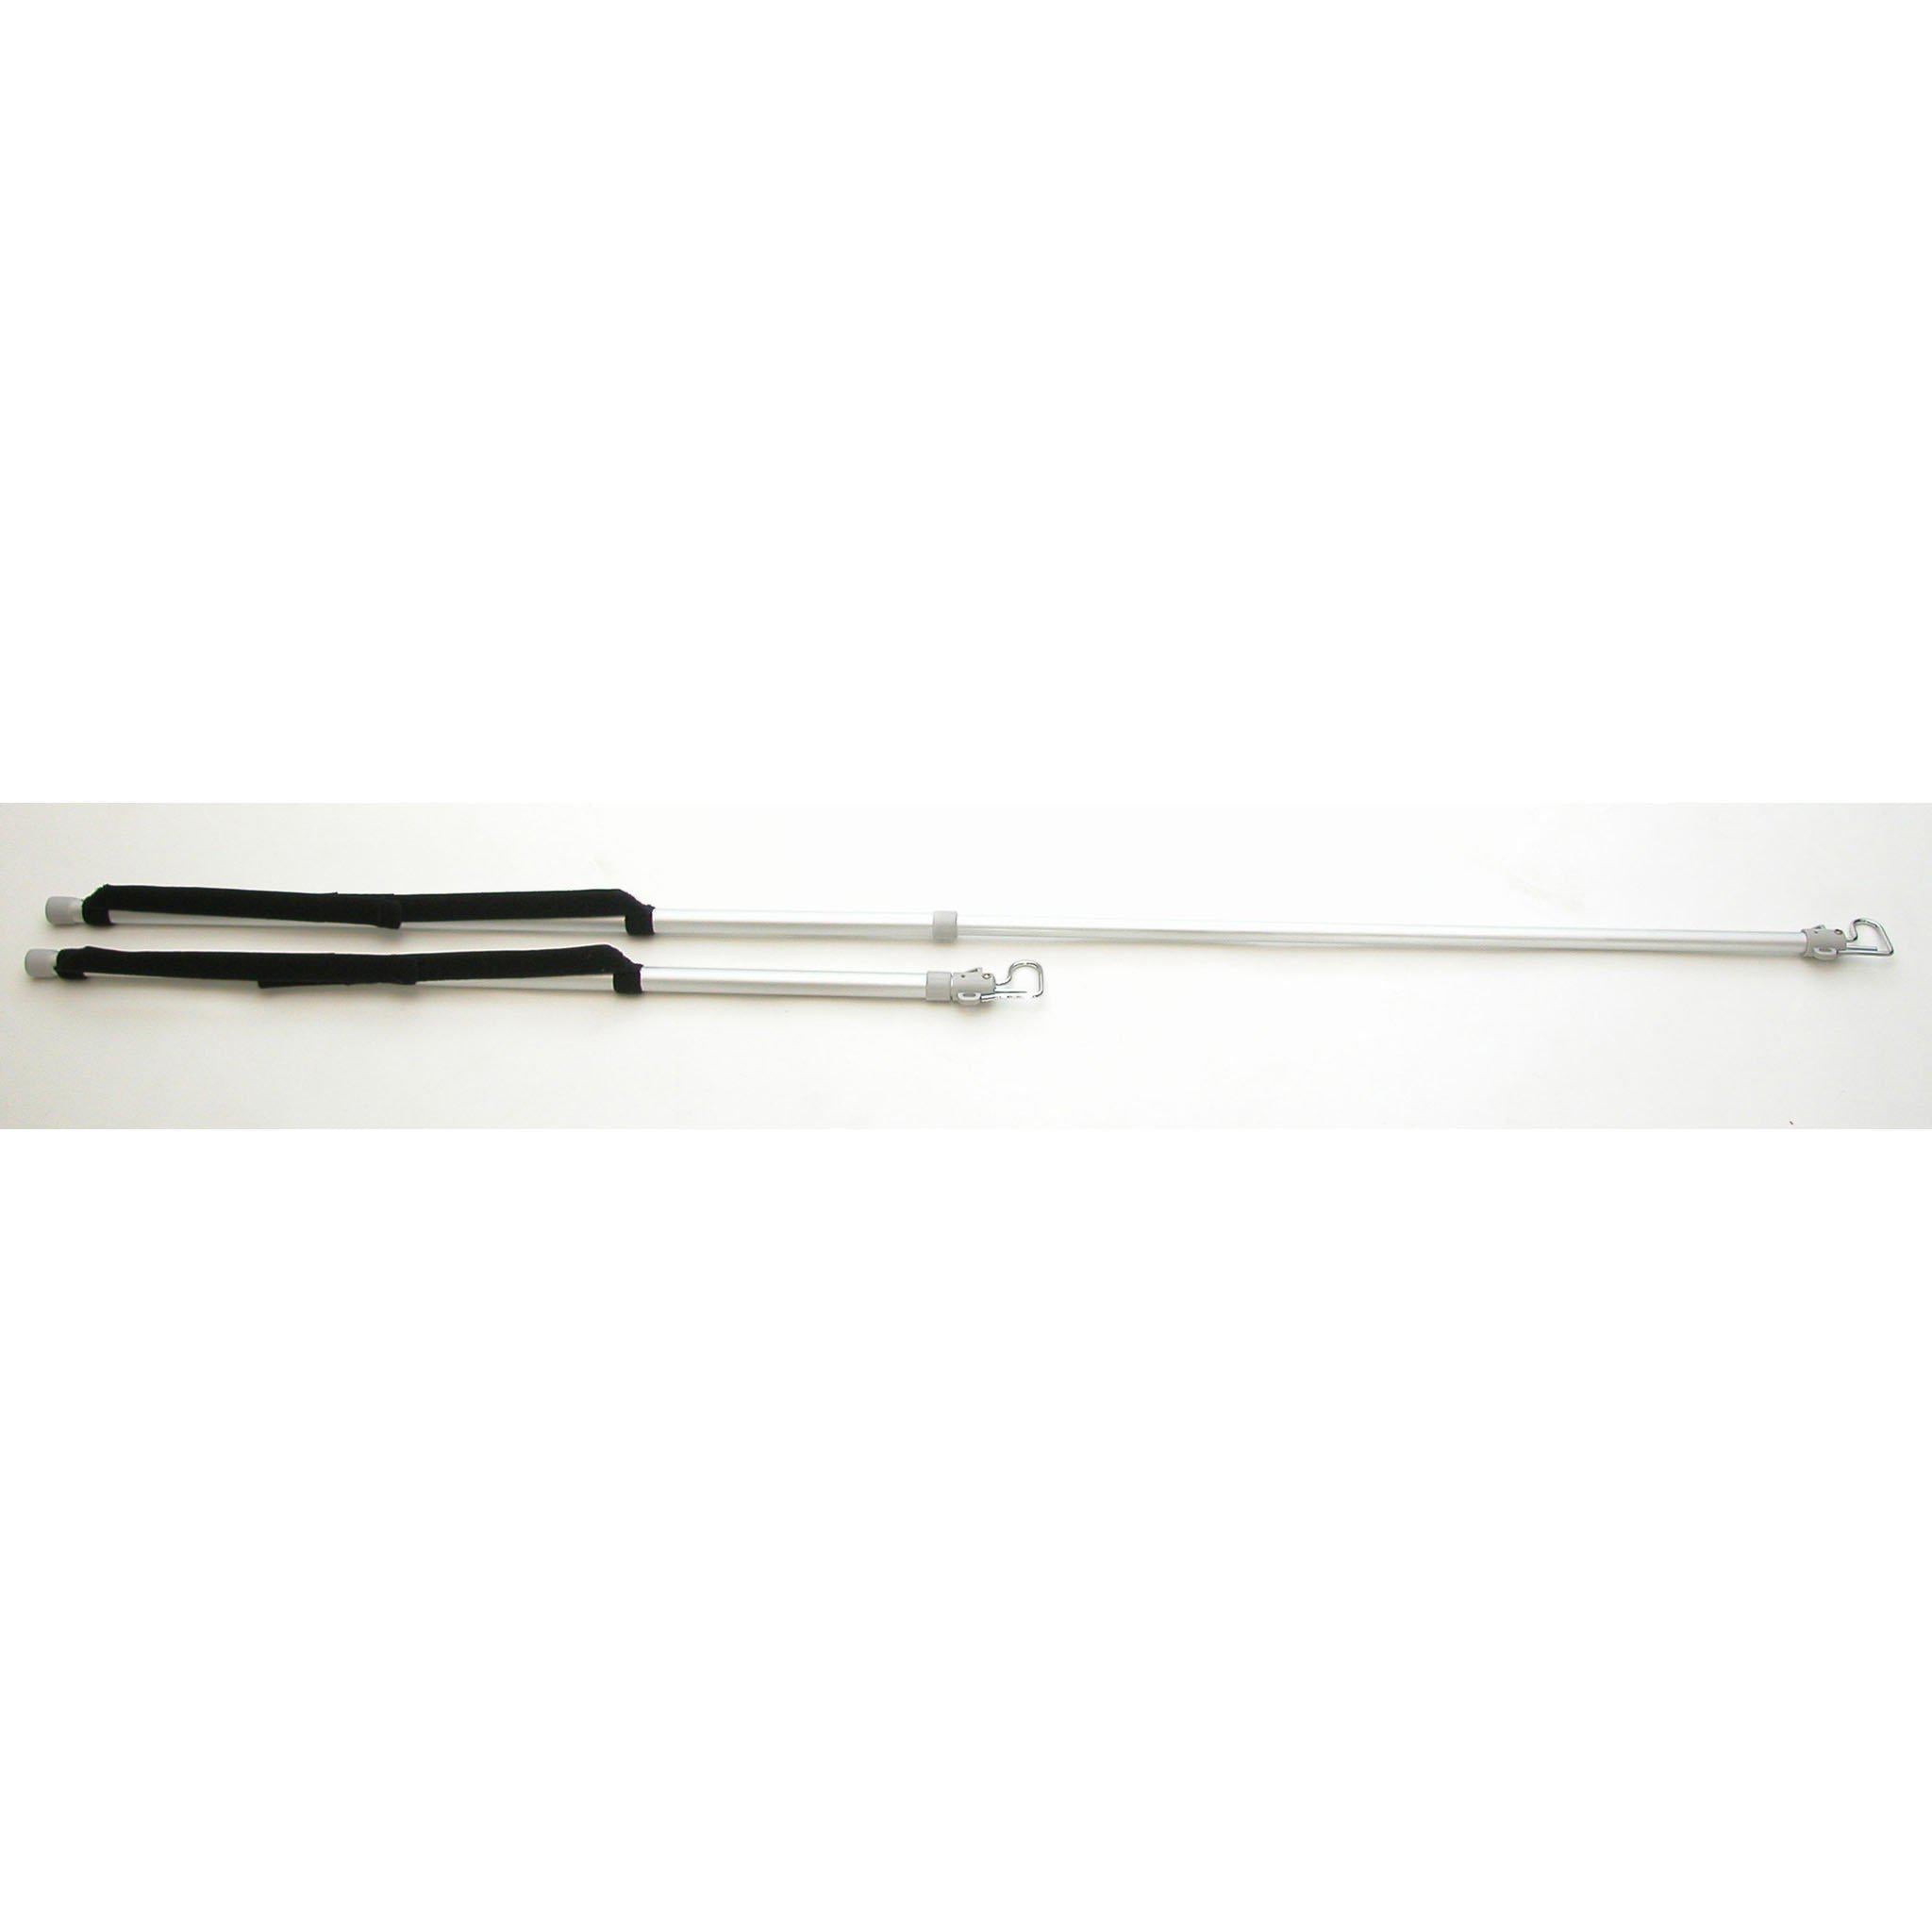 Collapsible IV Pole, Telescoping IV Pole